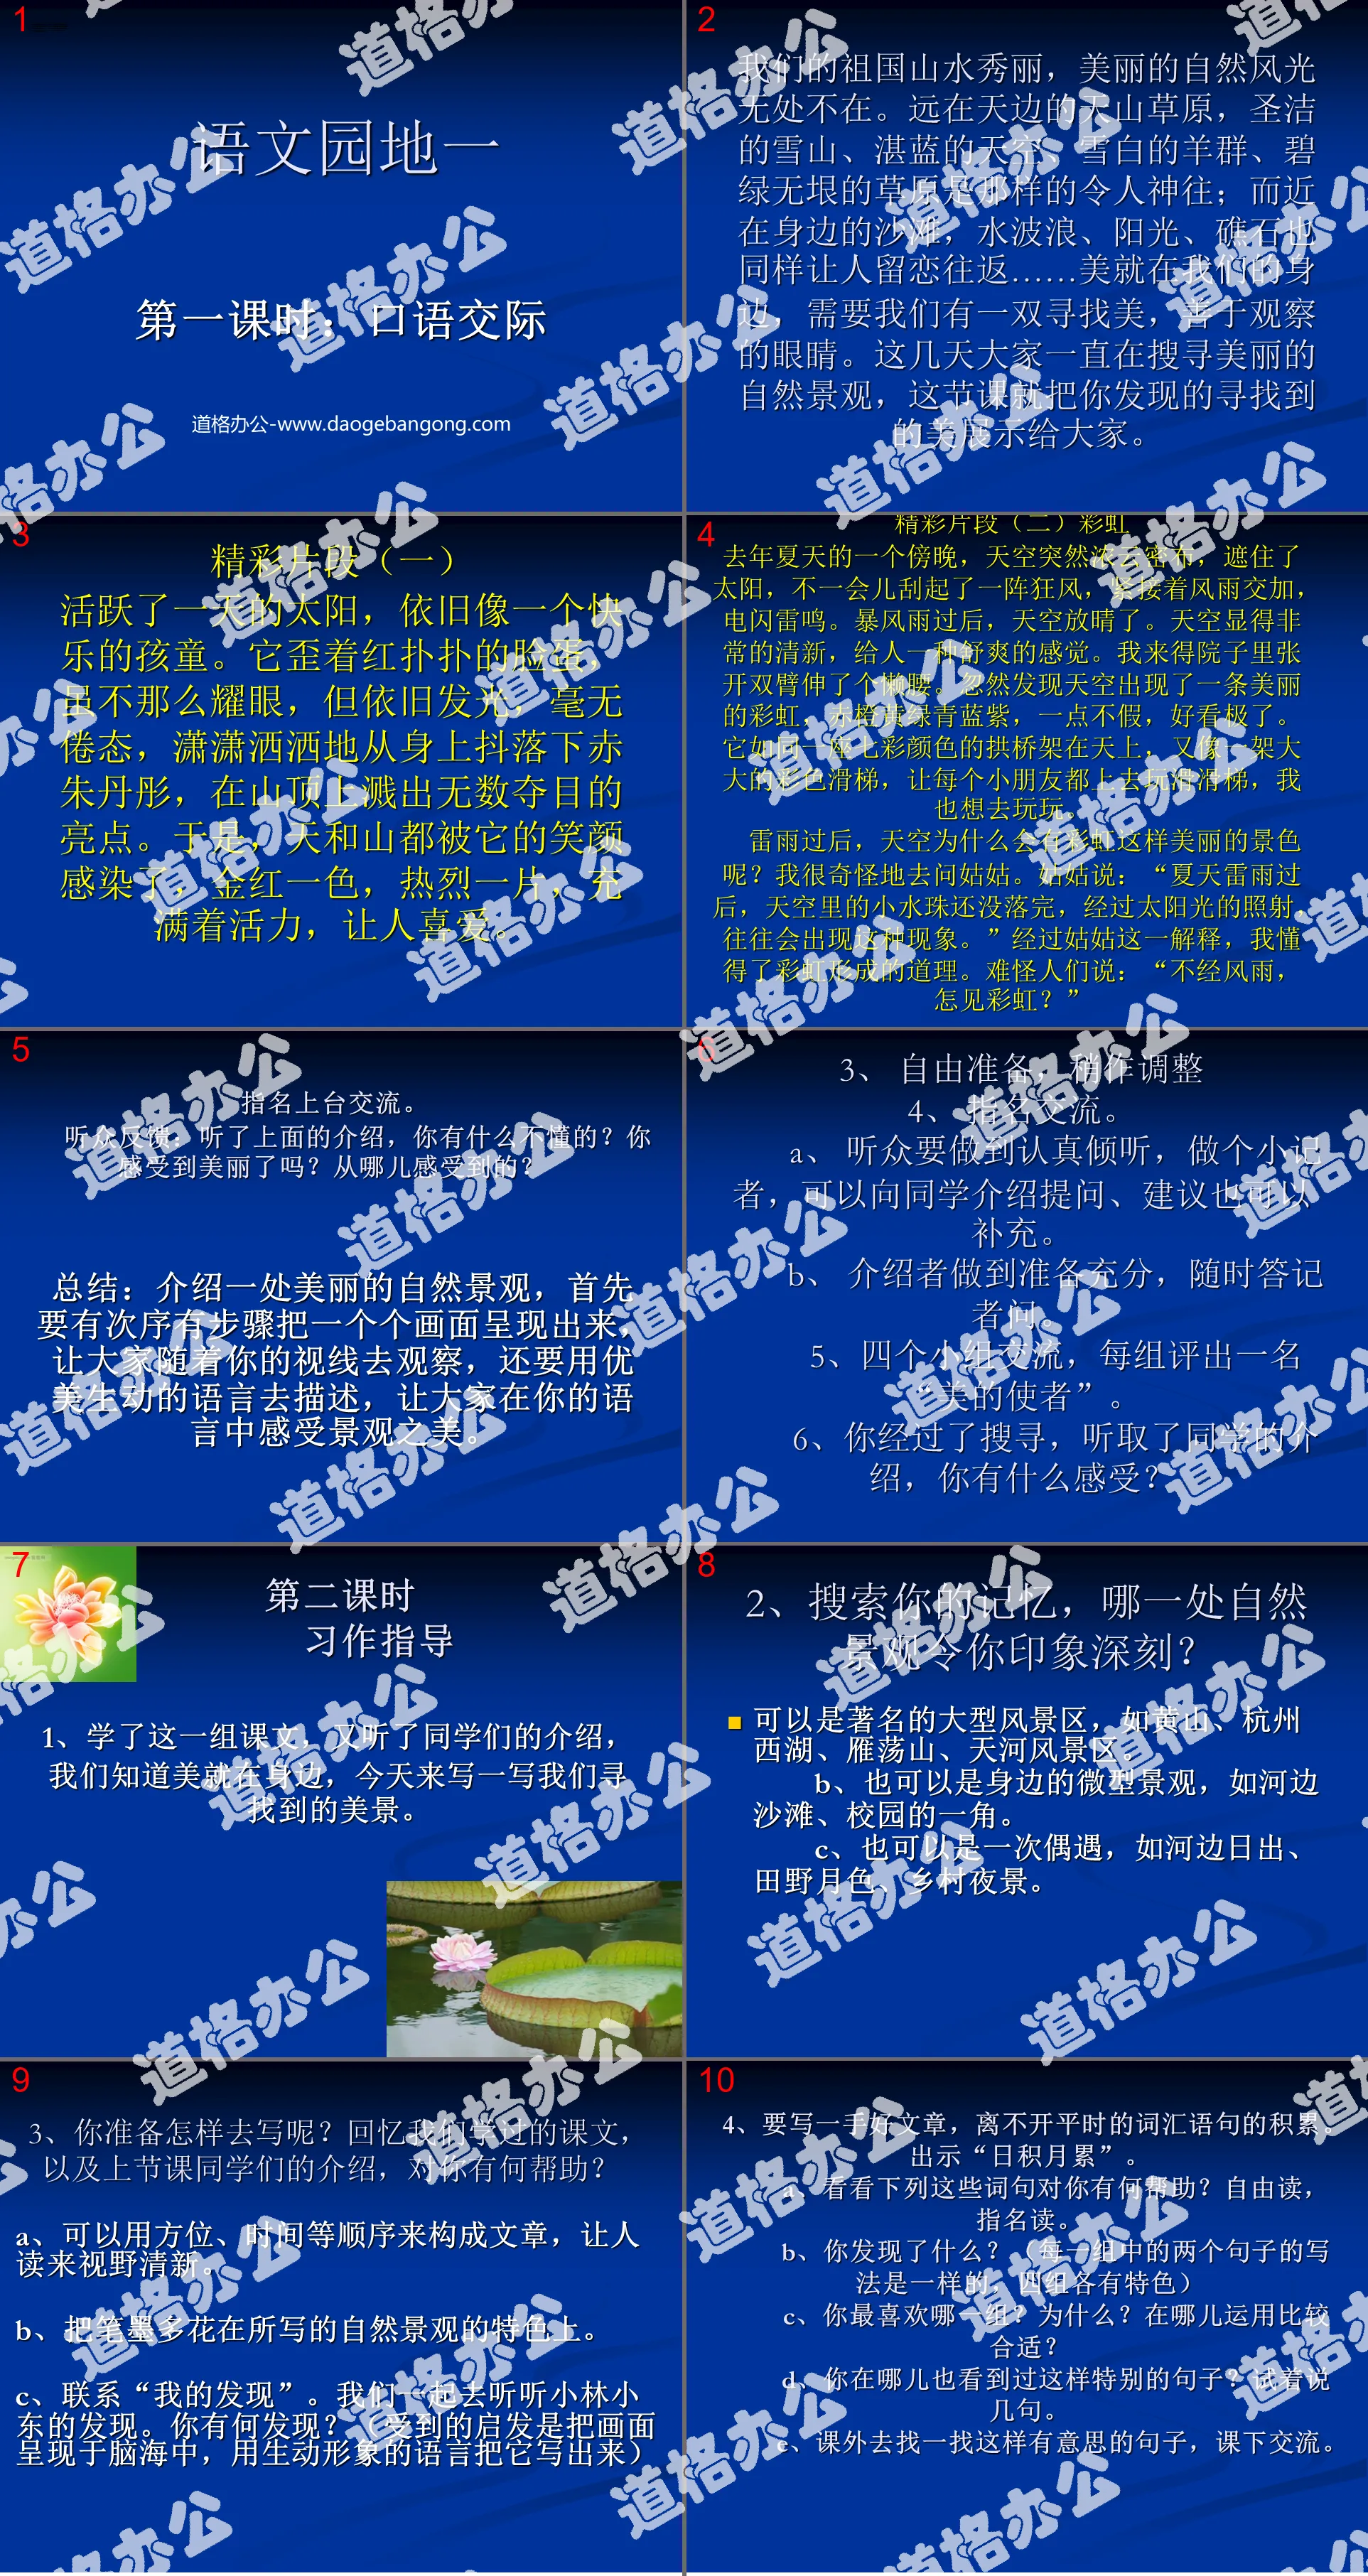 PPT courseware of "Chinese Garden 1" for fourth graders published by People's Education Press